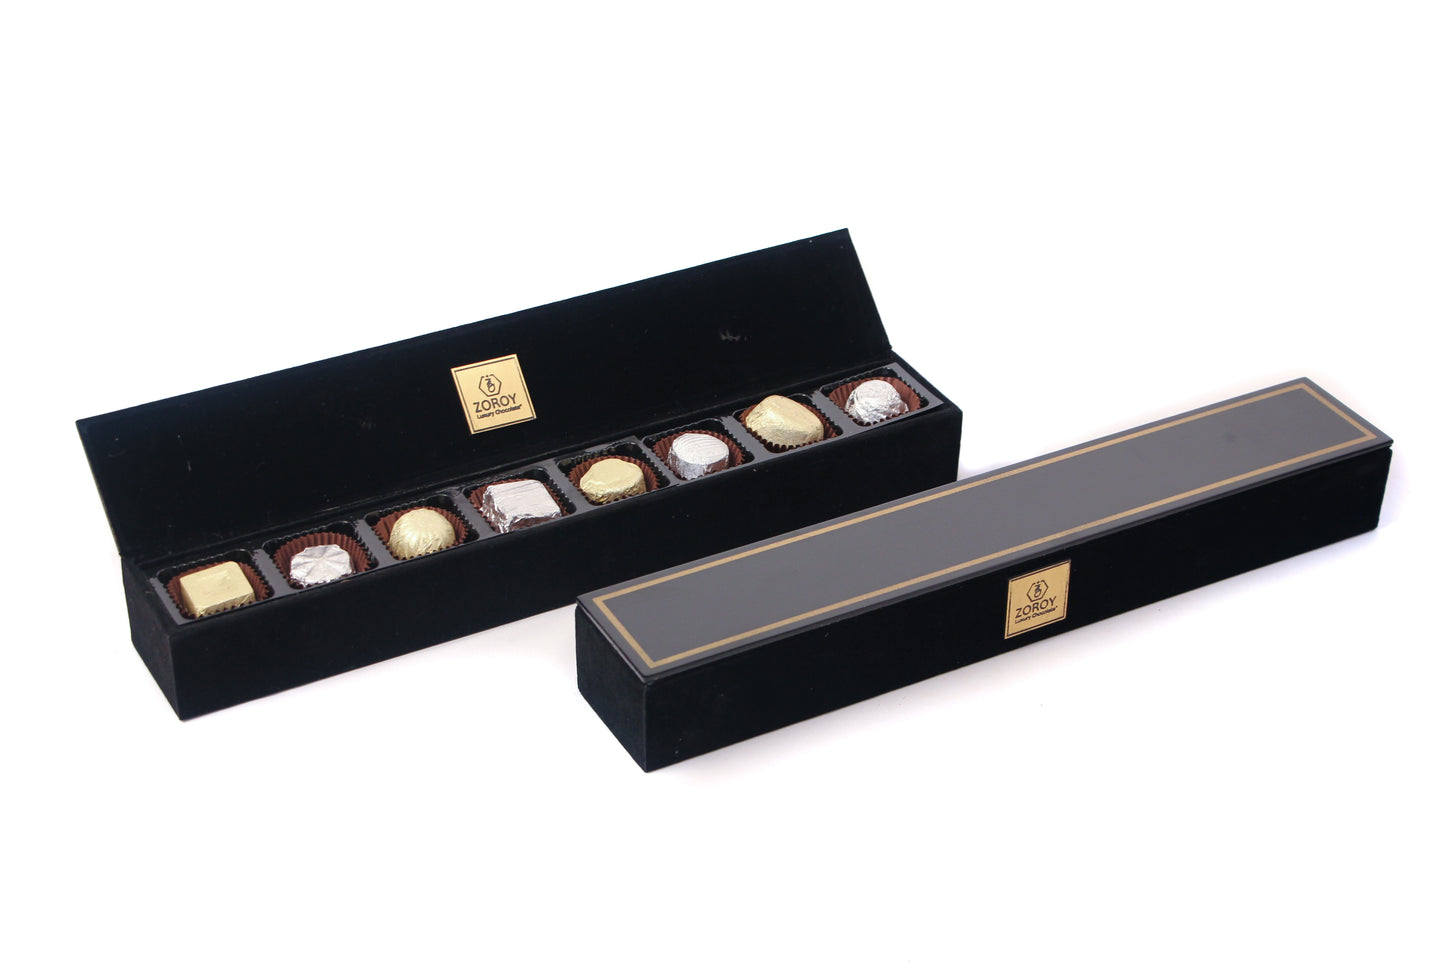 ZOROY Glossy Wooden Box with 8 Assorted Delite chocolates